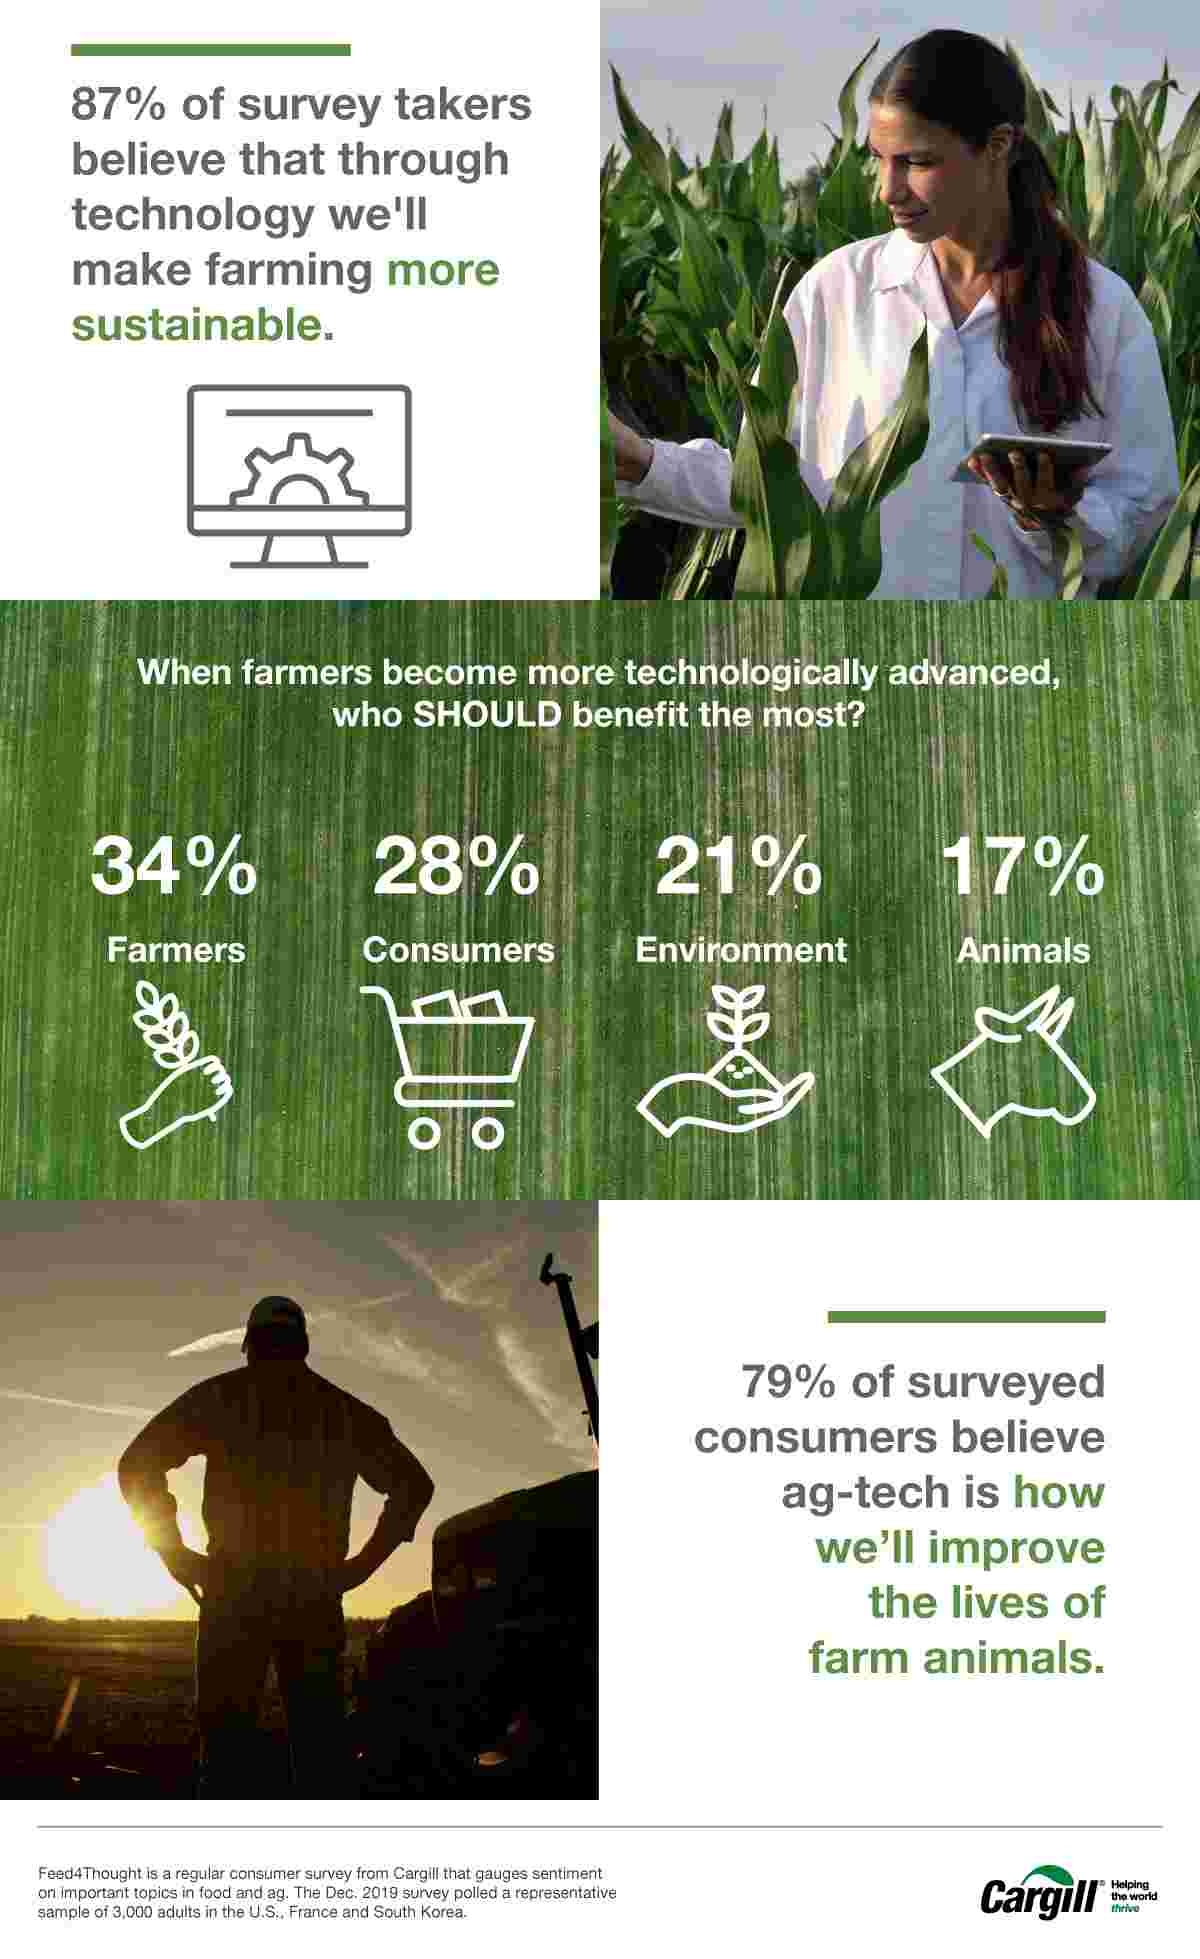 Consumers know technology in Ag is important - but remain skeptical Infographic image